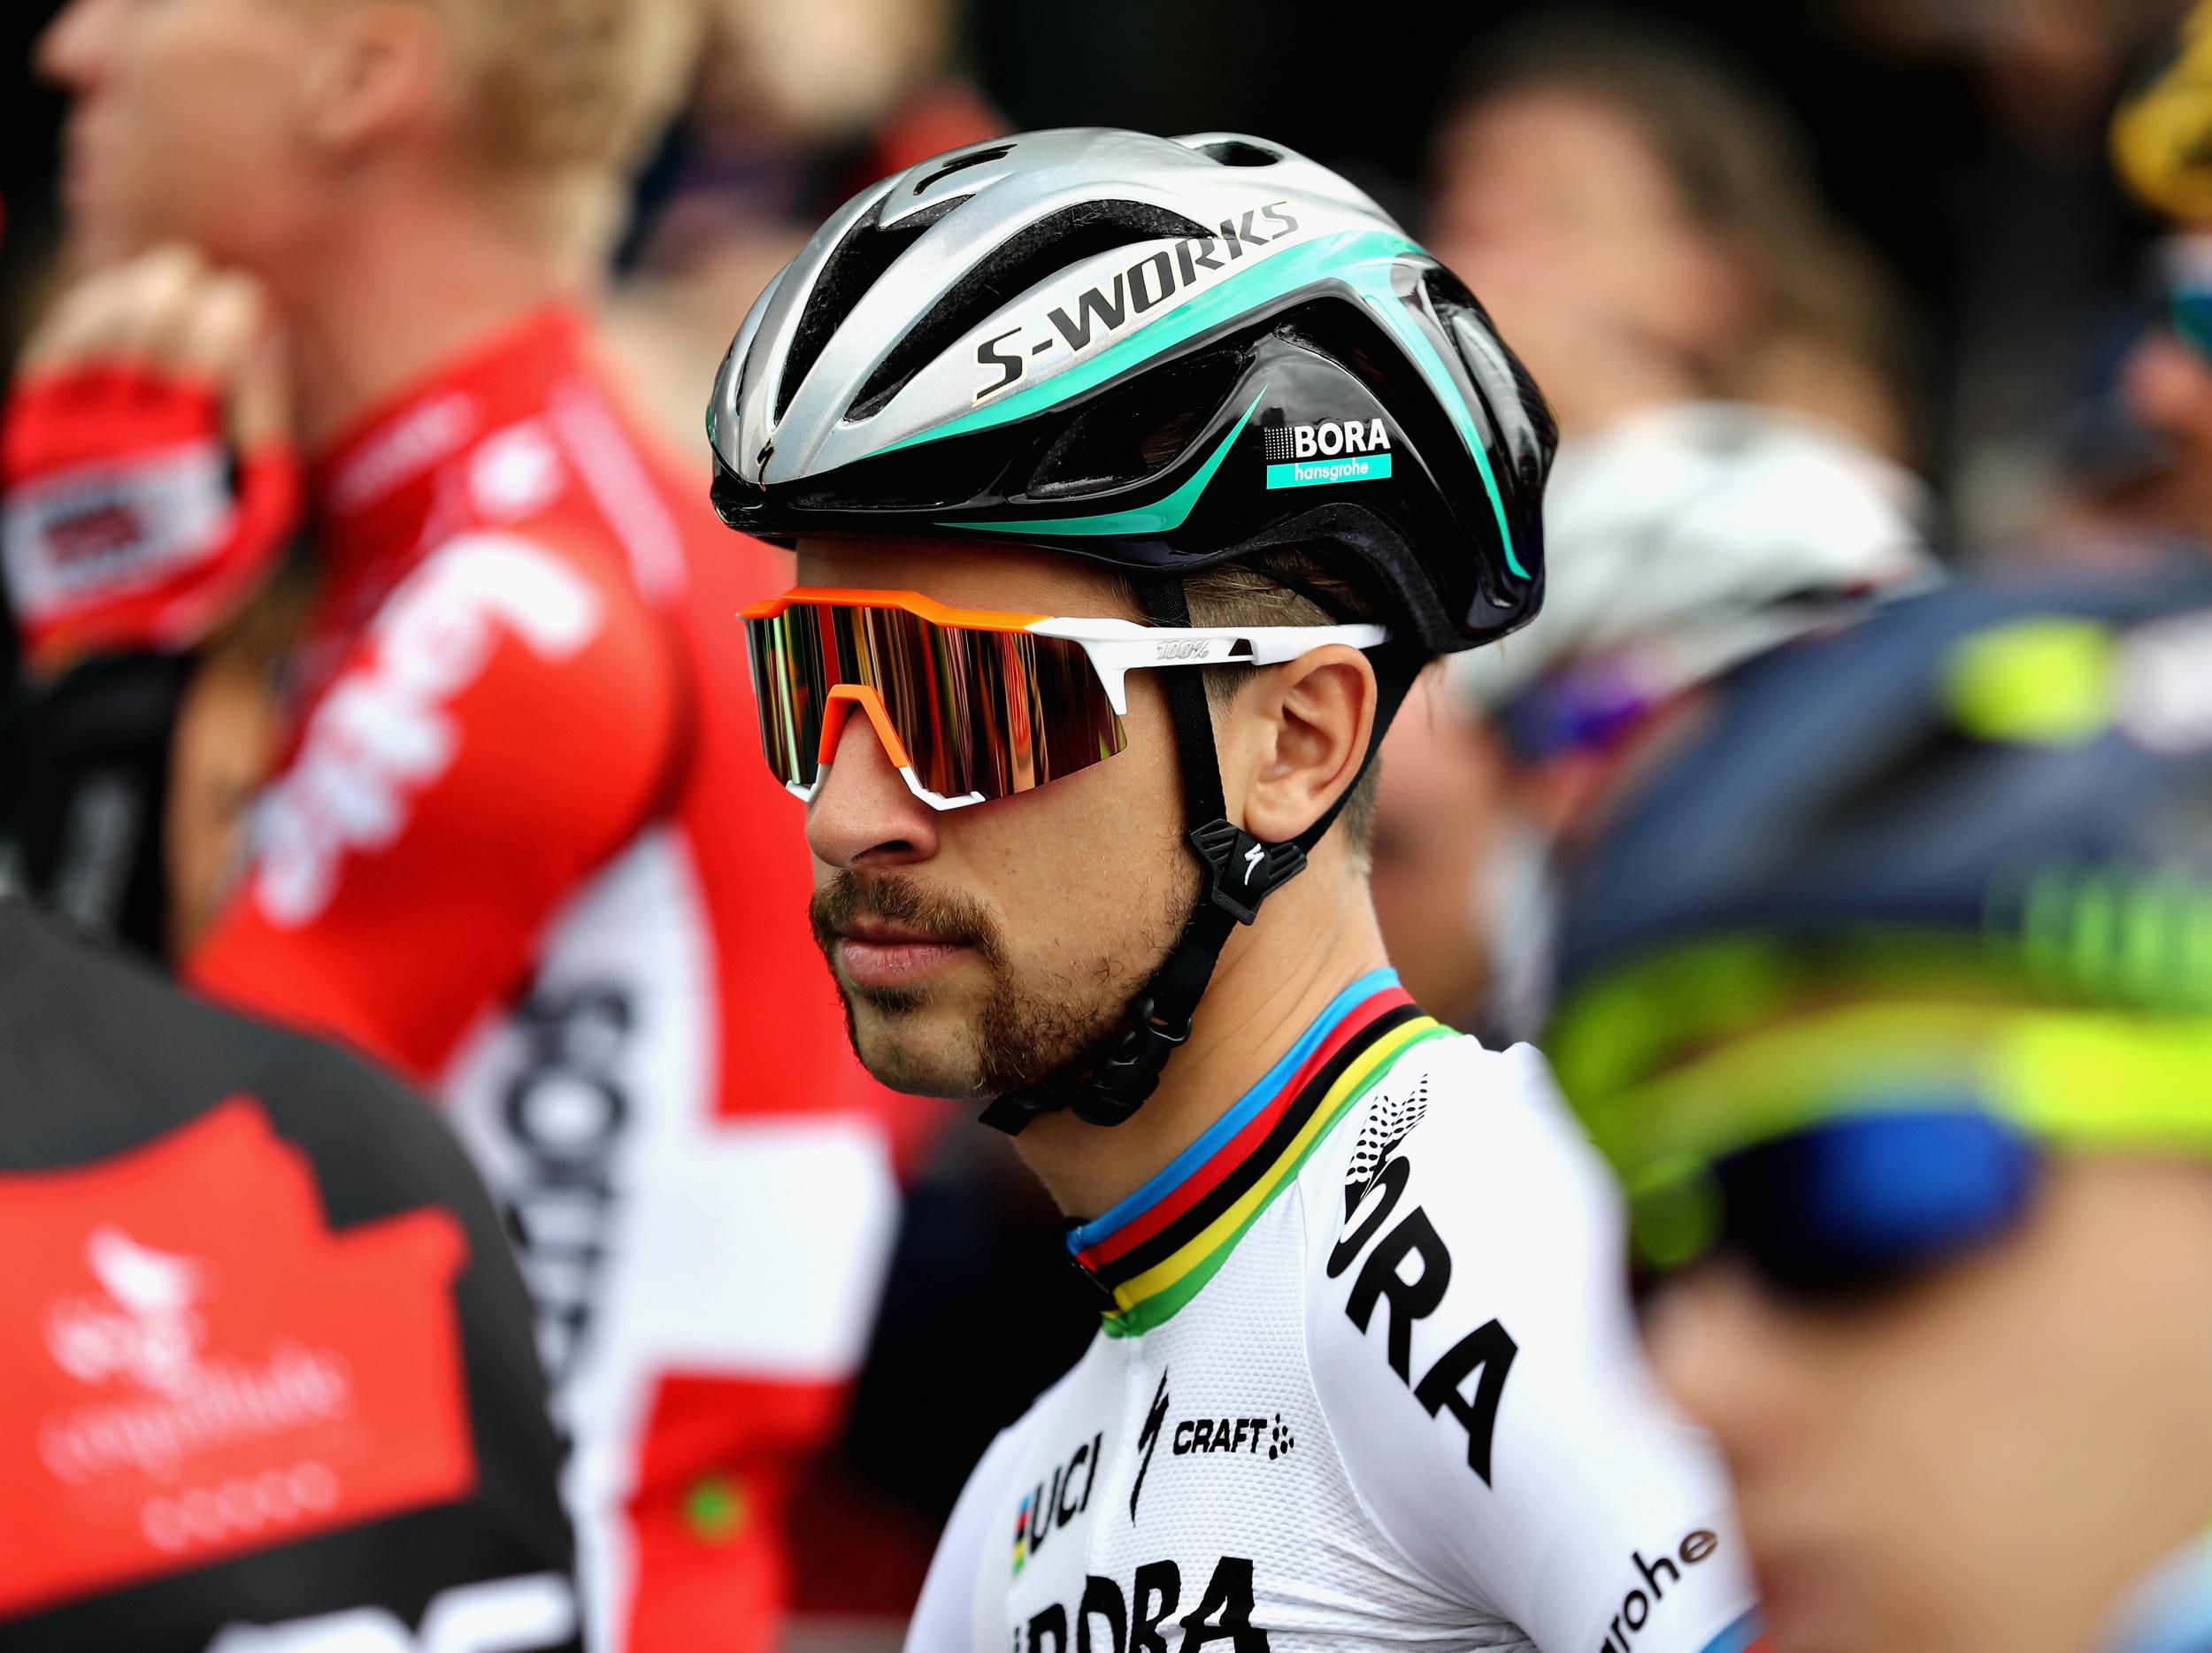 Sagan has been disqualified from the Tour